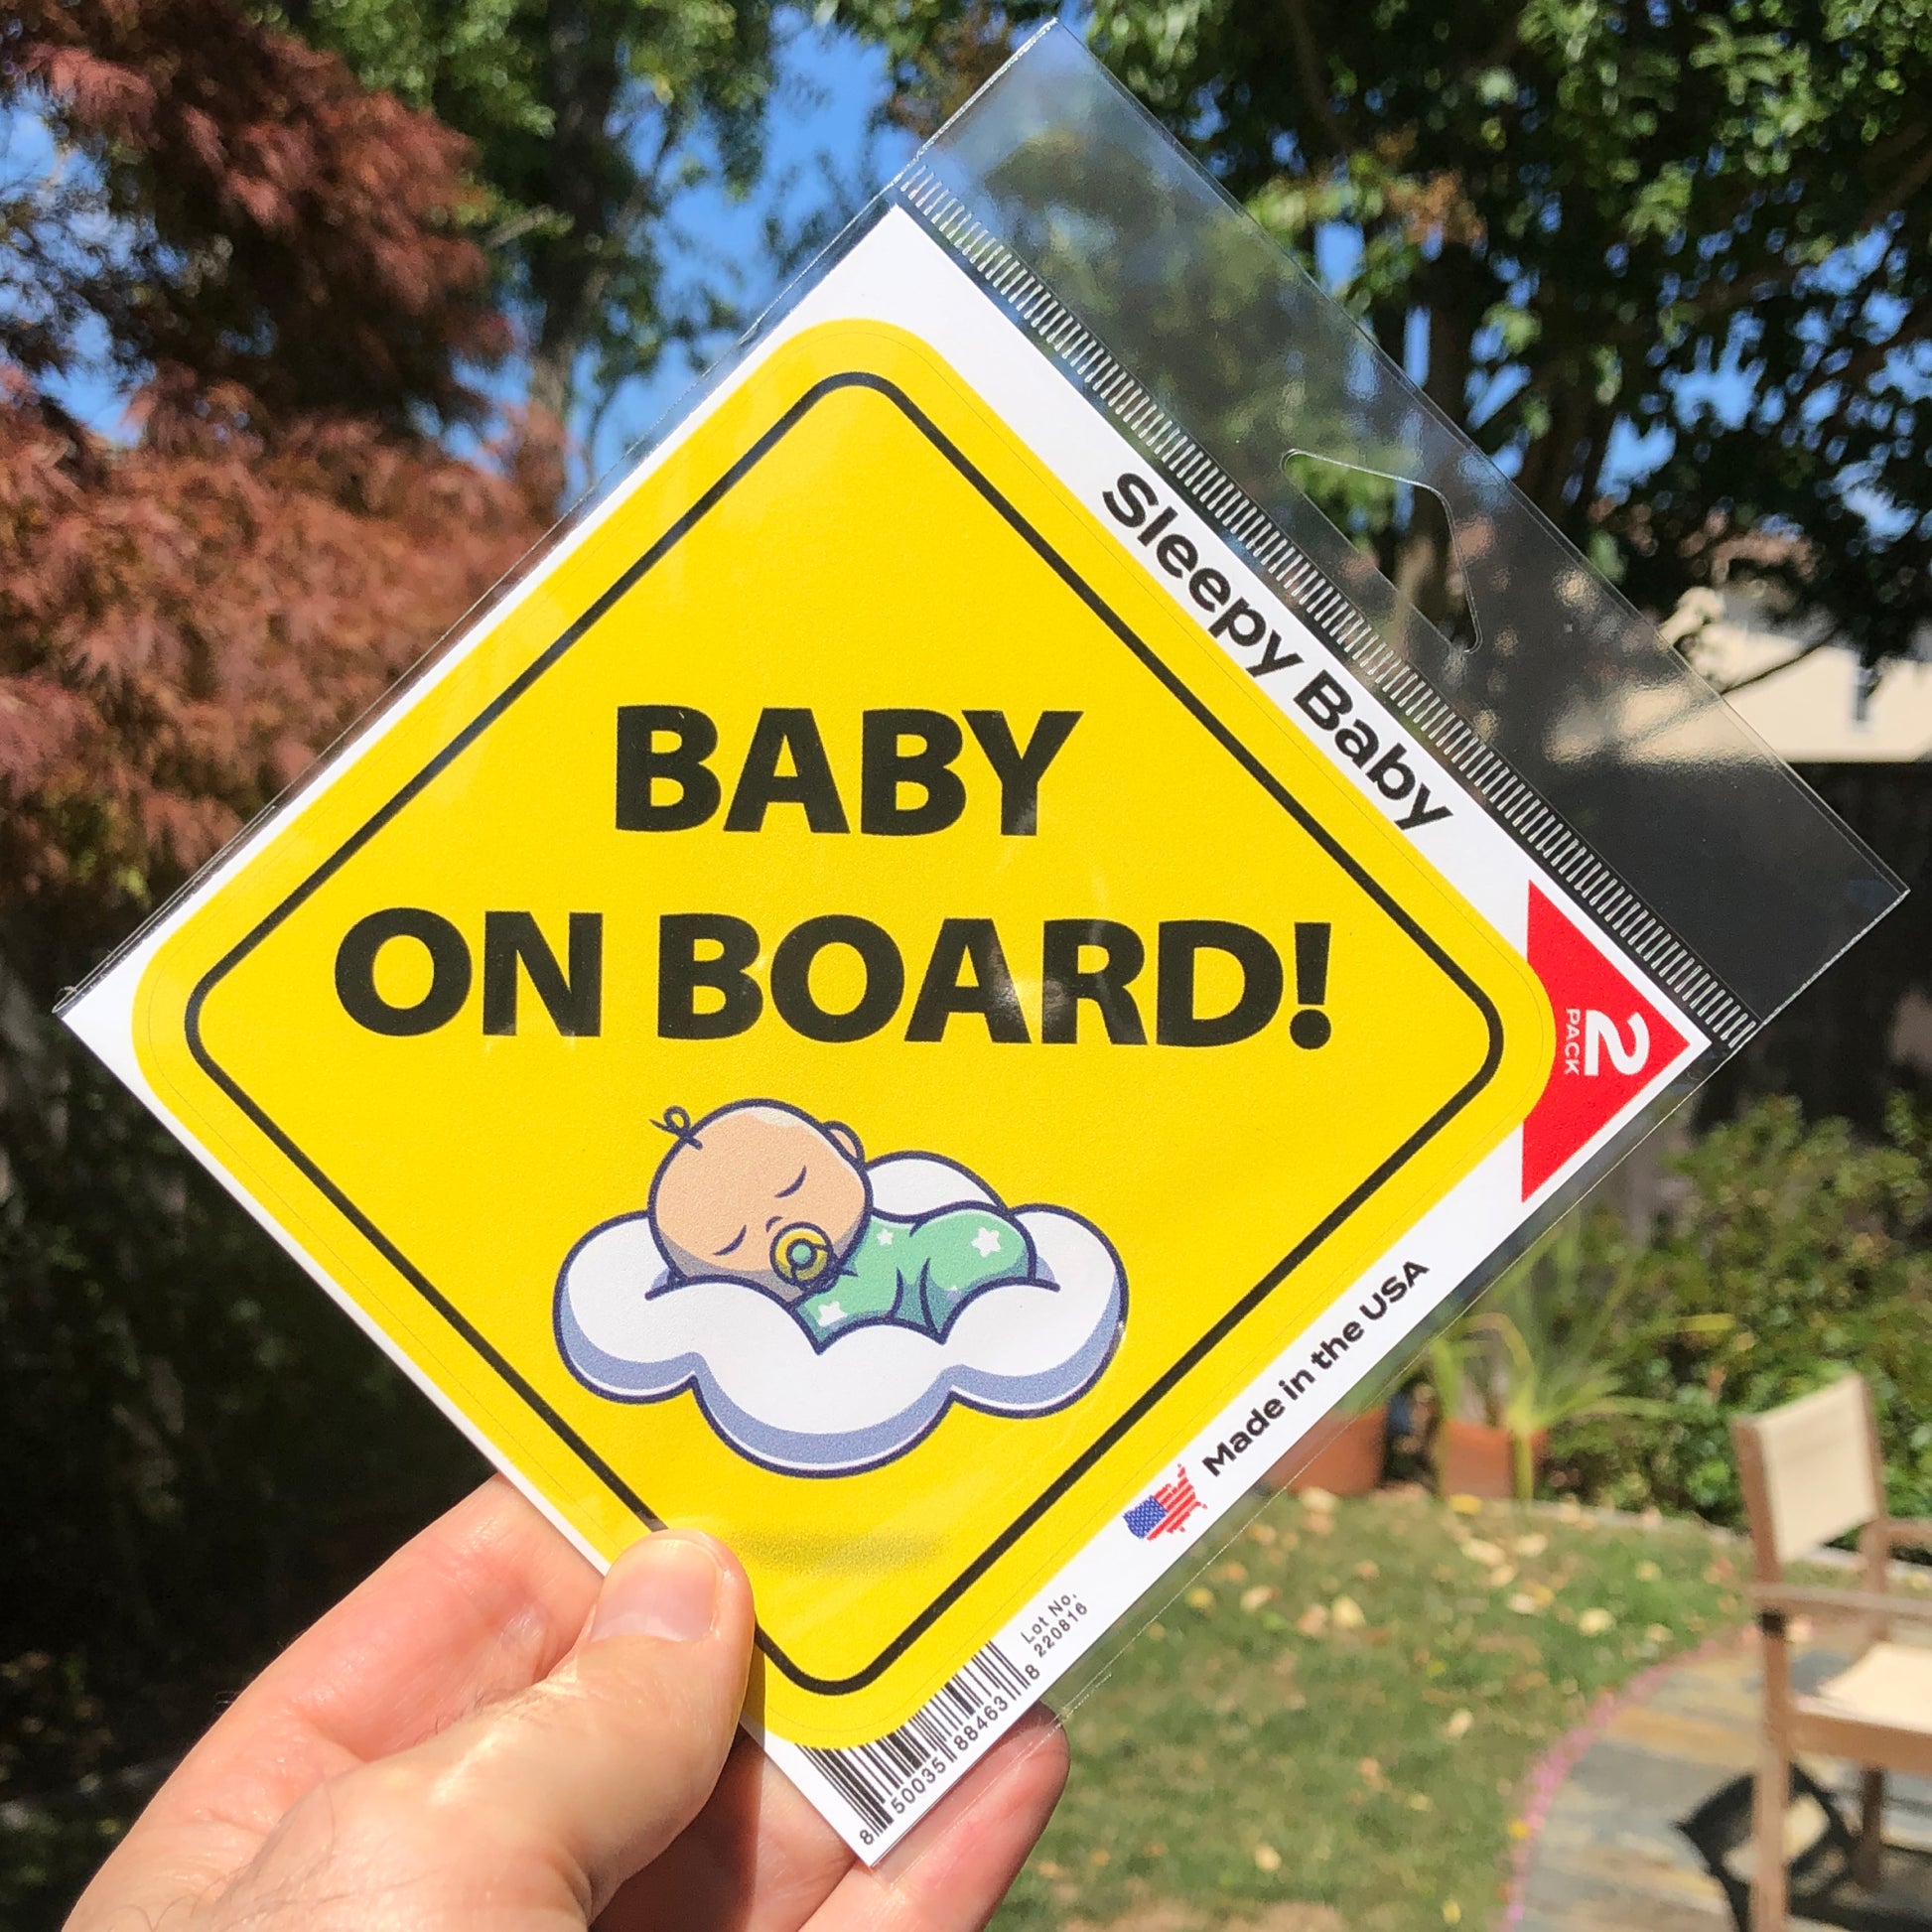 Baby on Board and Baby Sleeping Signs